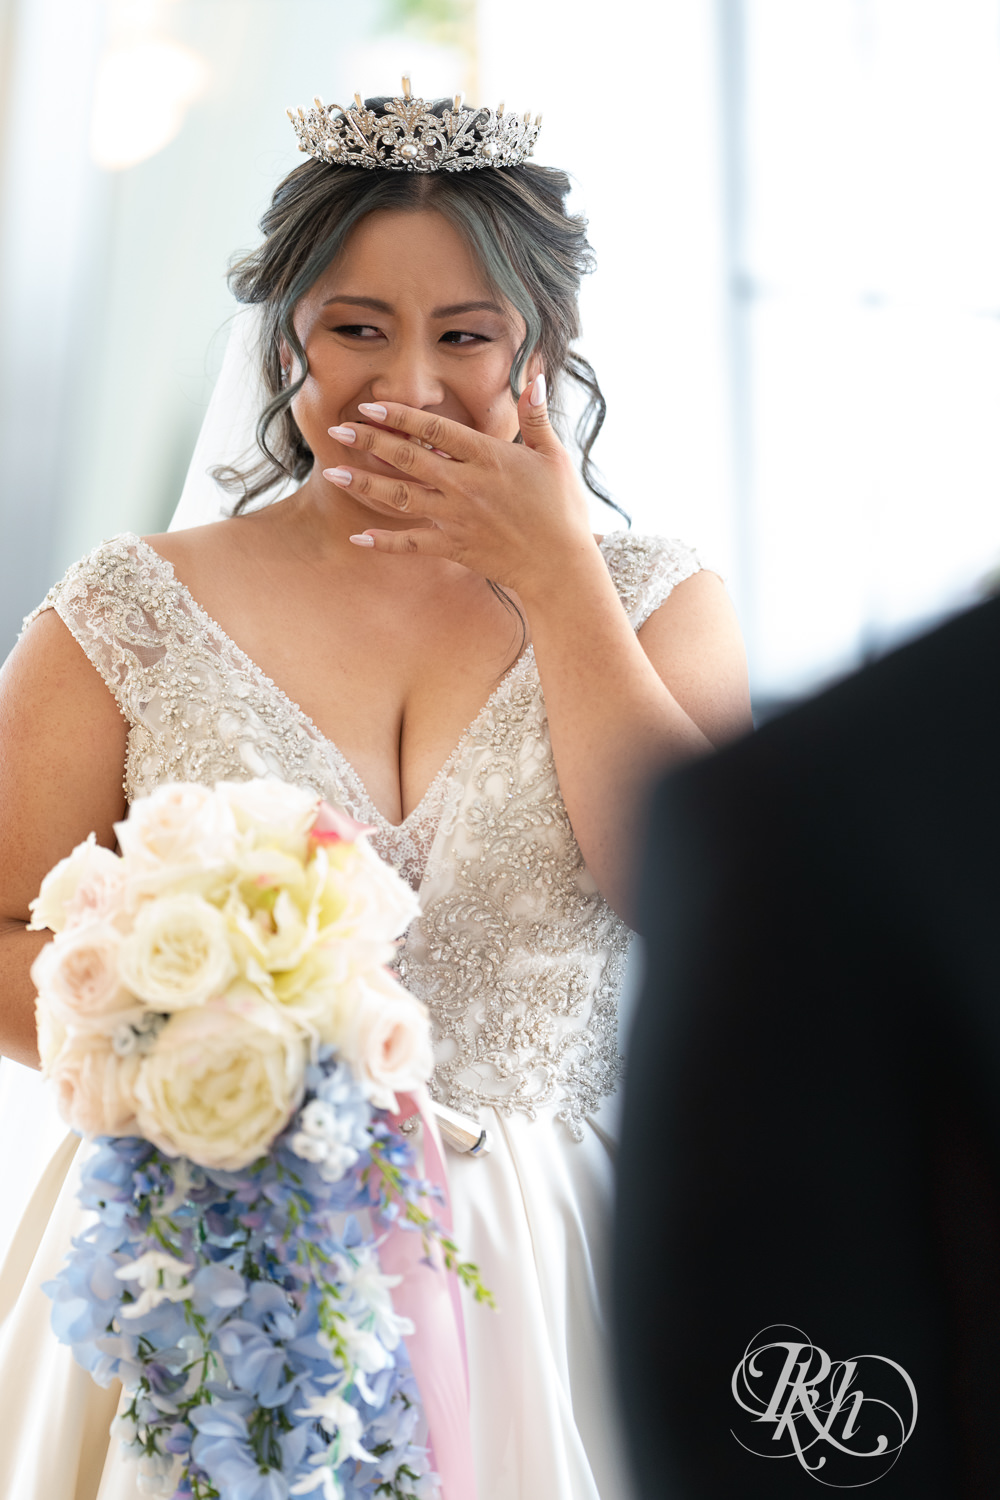 Hmong bride and groom share first look on wedding day at the Saint Paul Athletic Club in Saint Paul, Minnesota.